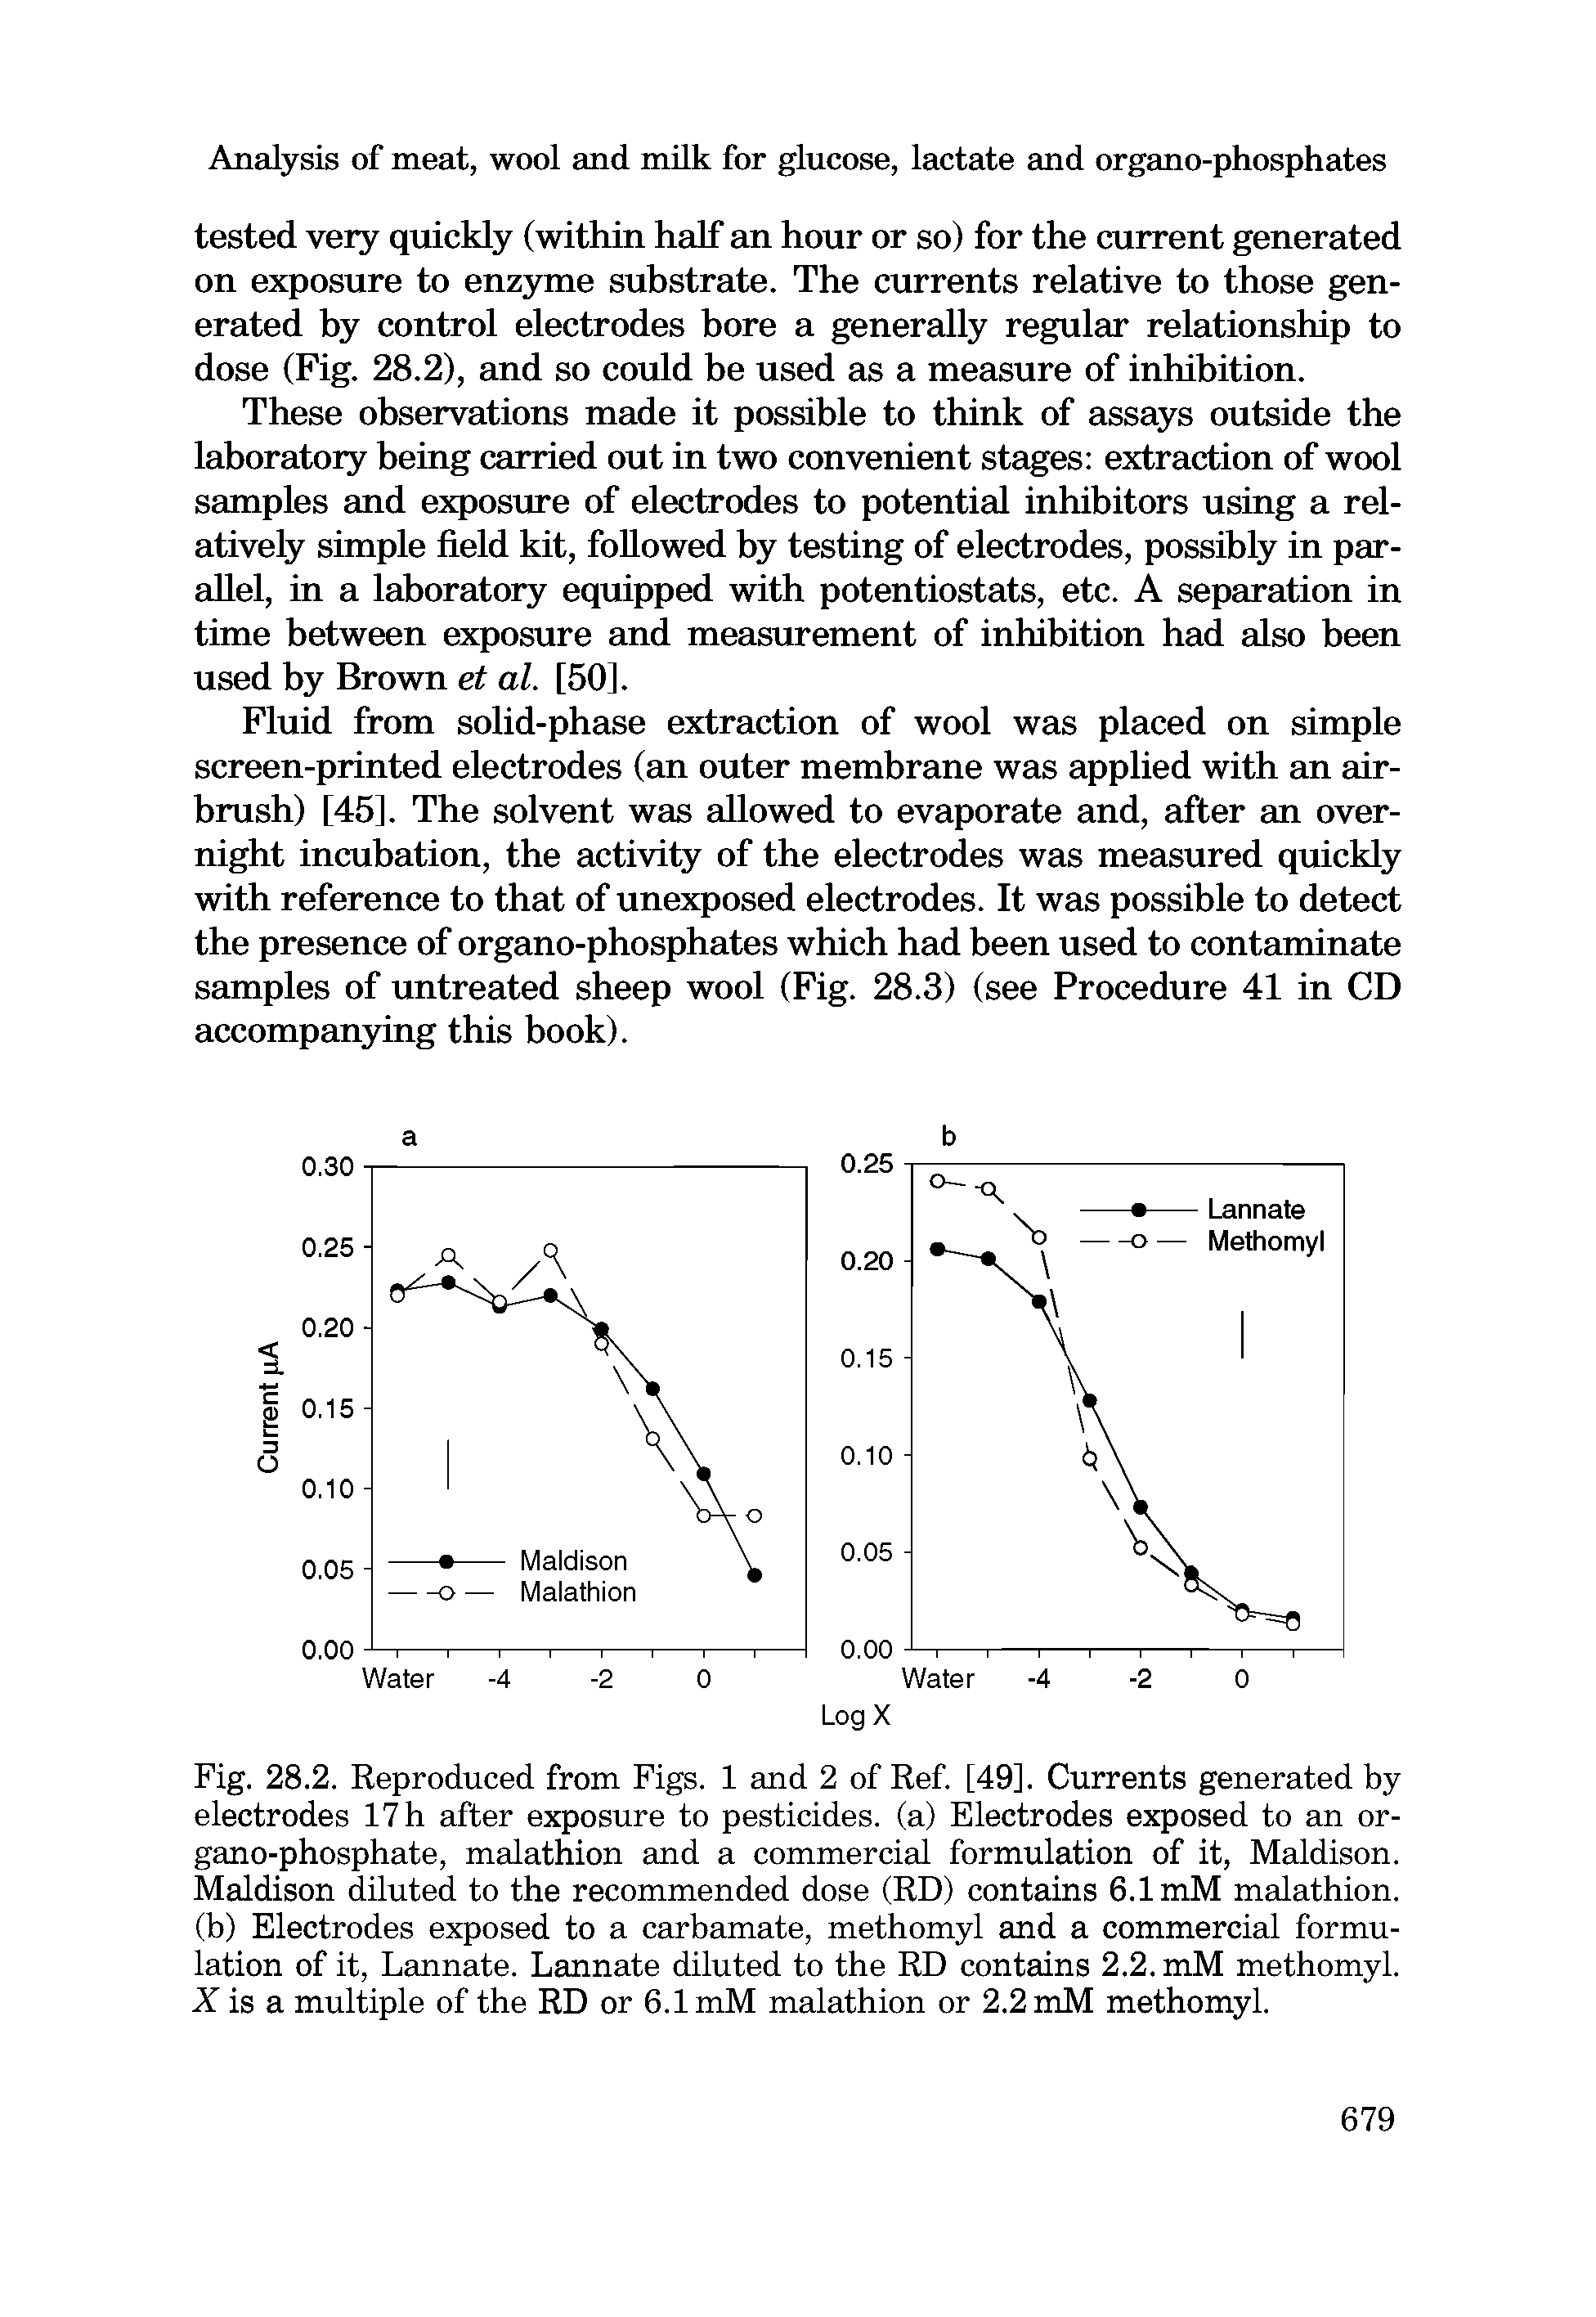 Fig. 28.2. Reproduced from Figs. 1 and 2 of Ref. [49]. Currents generated by electrodes 17 h after exposure to pesticides, (a) Electrodes exposed to an or-gano-phosphate, malathion and a commercial formulation of it, Maldison. Maldison diluted to the recommended dose (RD) contains 6.1 mM malathion. (b) Electrodes exposed to a carbamate, methomyl and a commercial formulation of it, Lannate. Lannate diluted to the RD contains 2.2. mM methomyl. A is a multiple of the RD or 6.1 mM malathion or 2.2 mM methomyl.